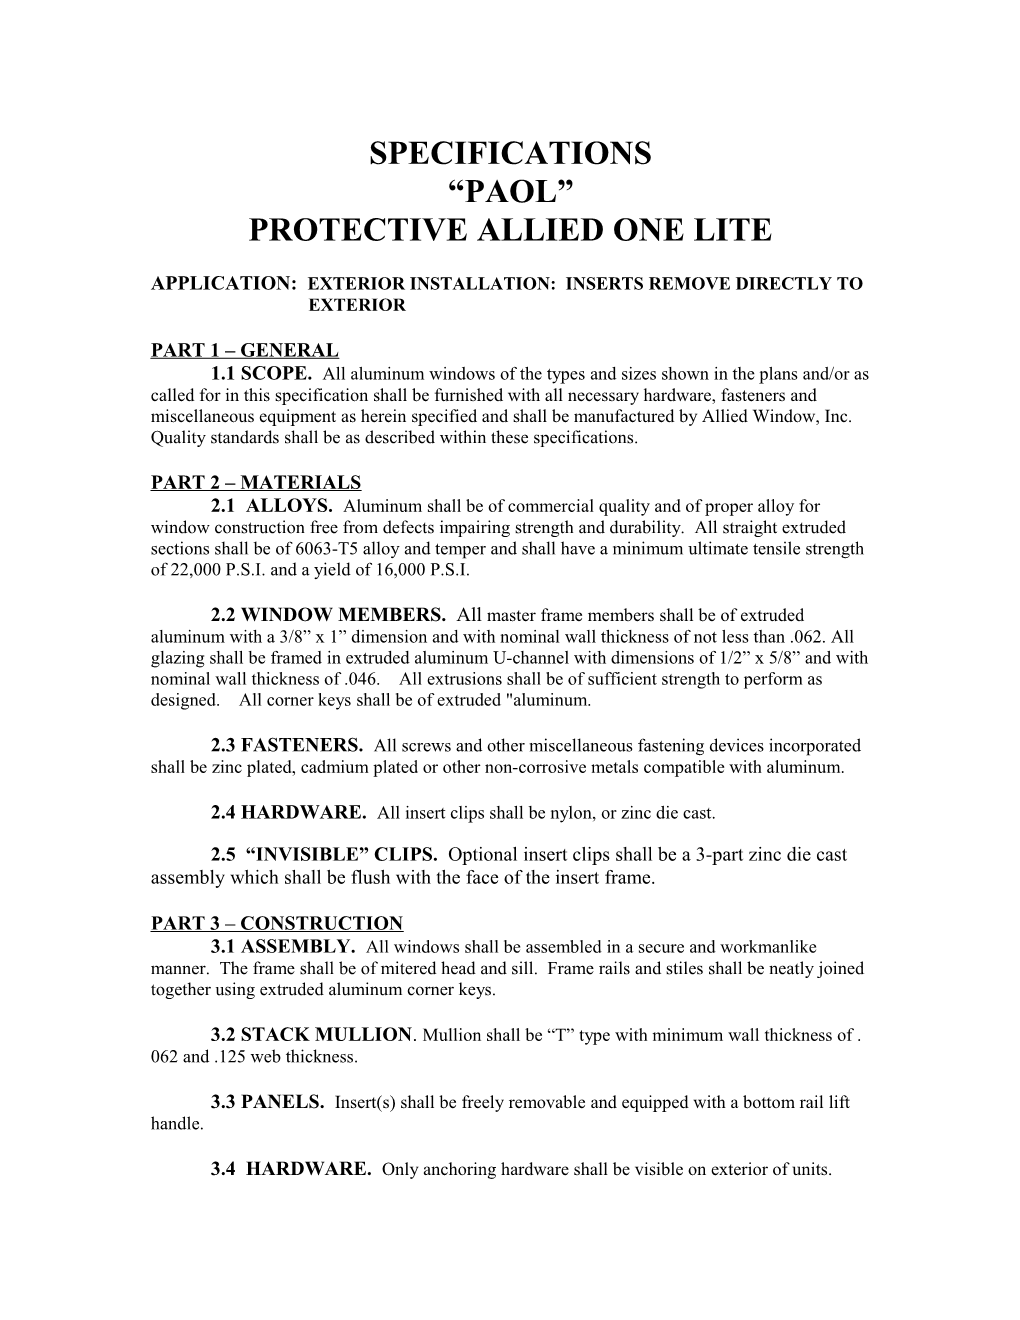 Protective Allied One Lite